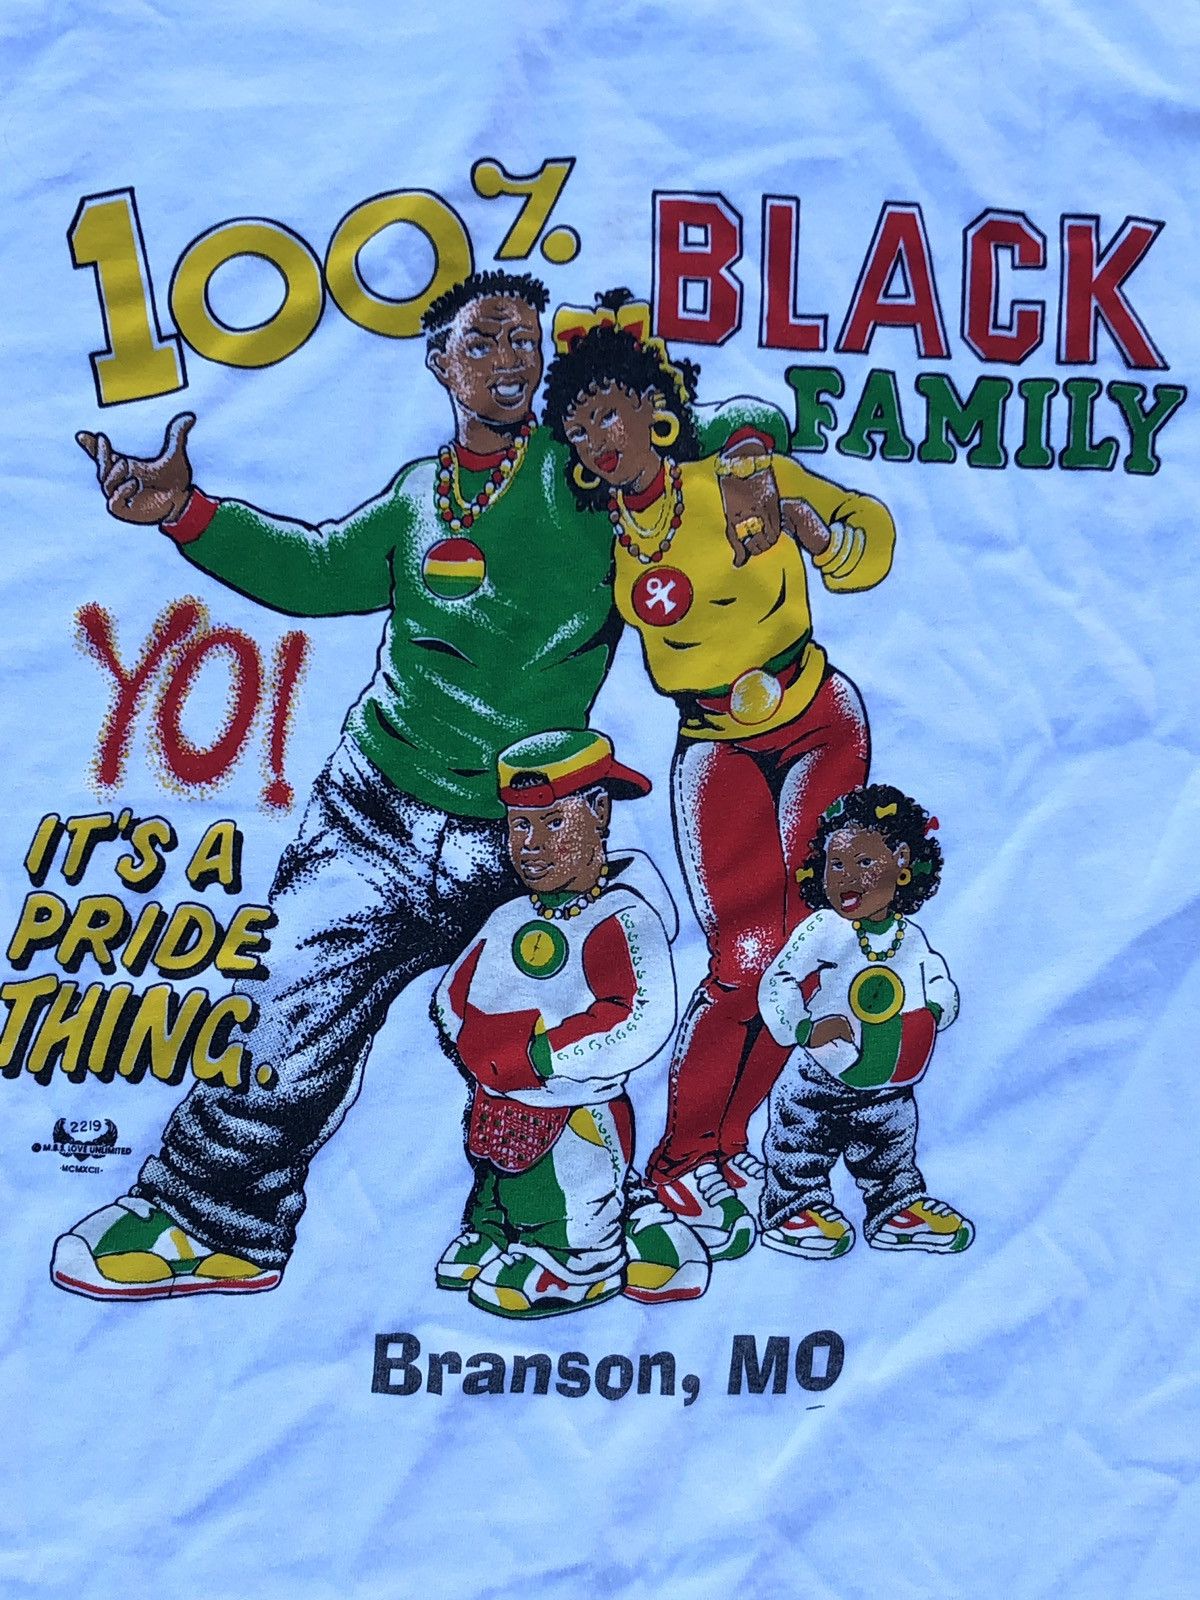 Vintage Vintage 100% Black Family “It’s A Pride Thing” Tee Size US XL / EU 56 / 4 - 2 Preview